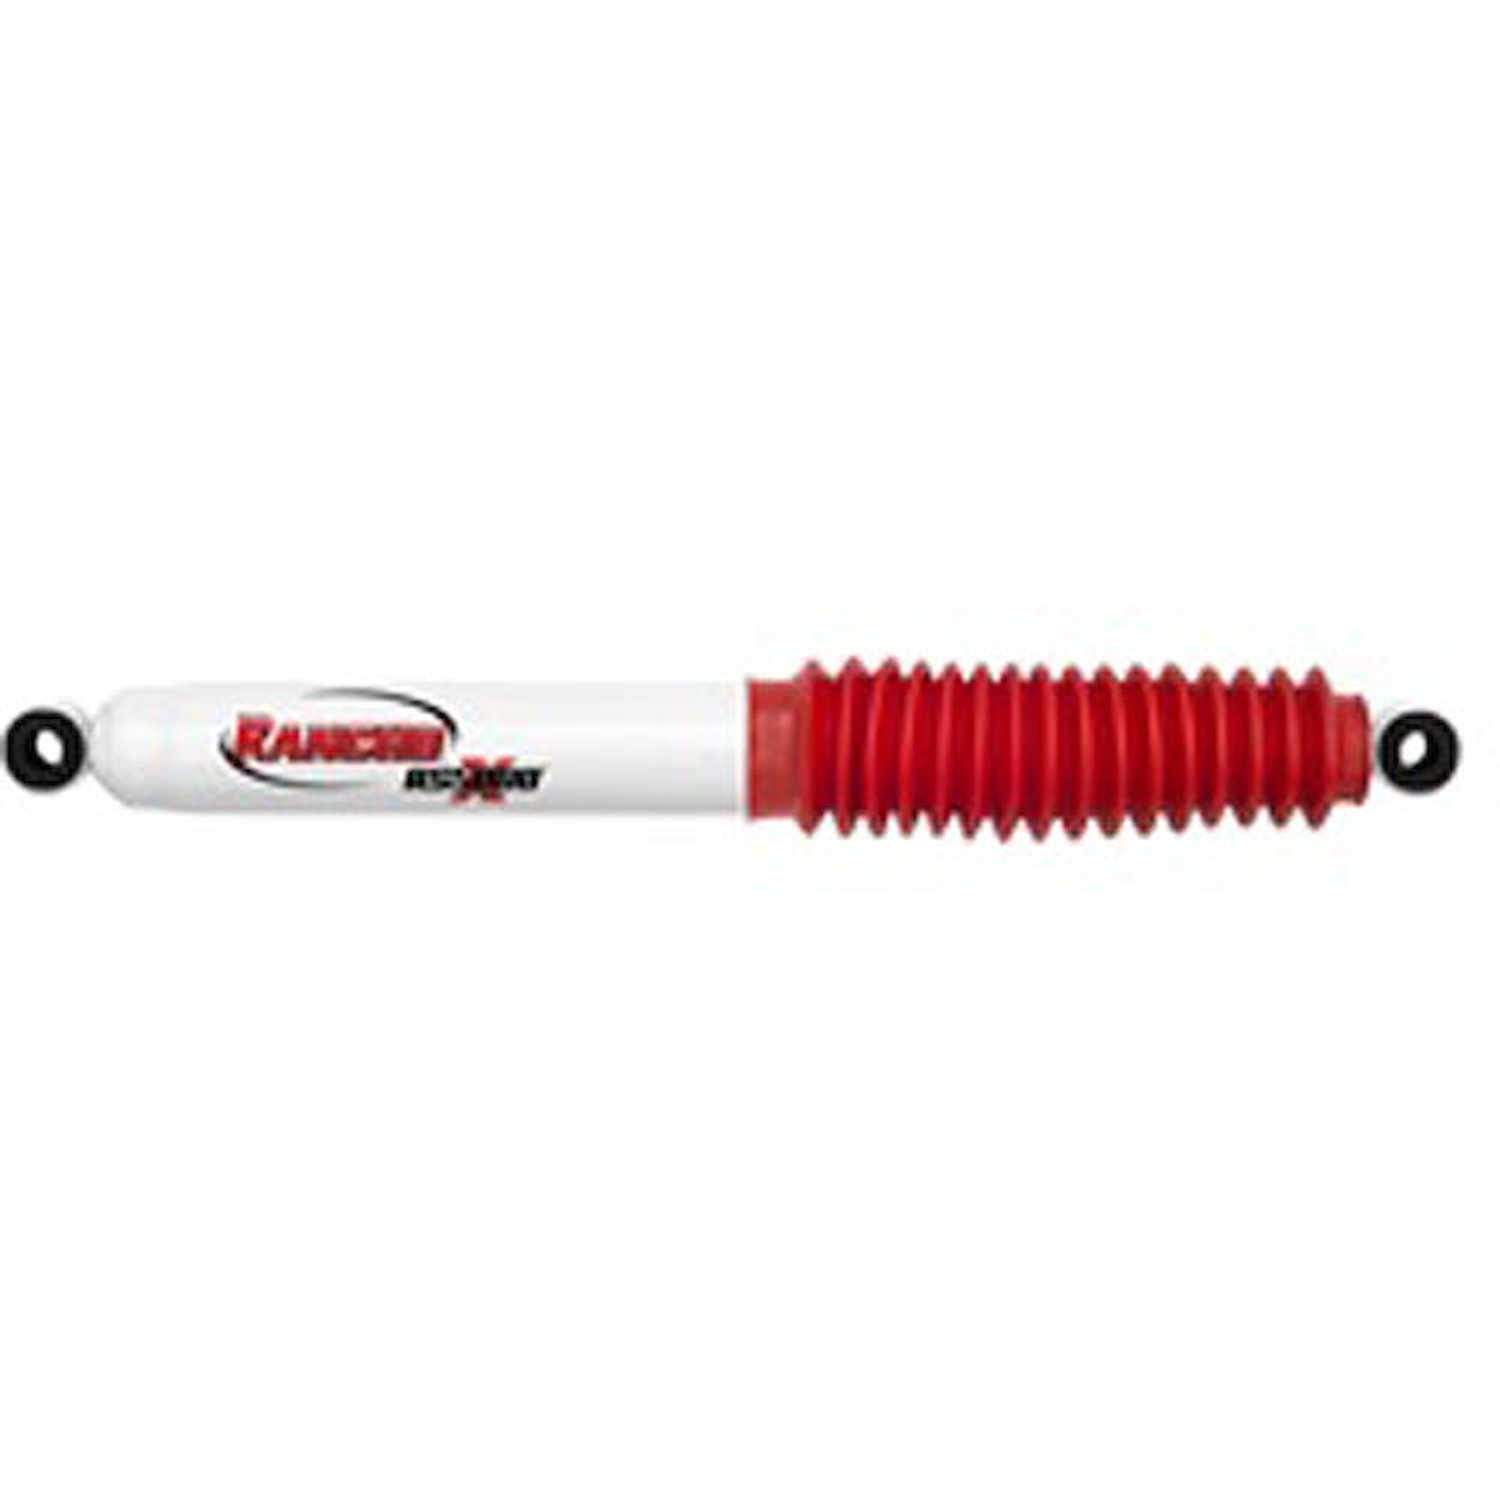 RS5000X Rear Shock Absorber Fits Jeep Wrangler YJ